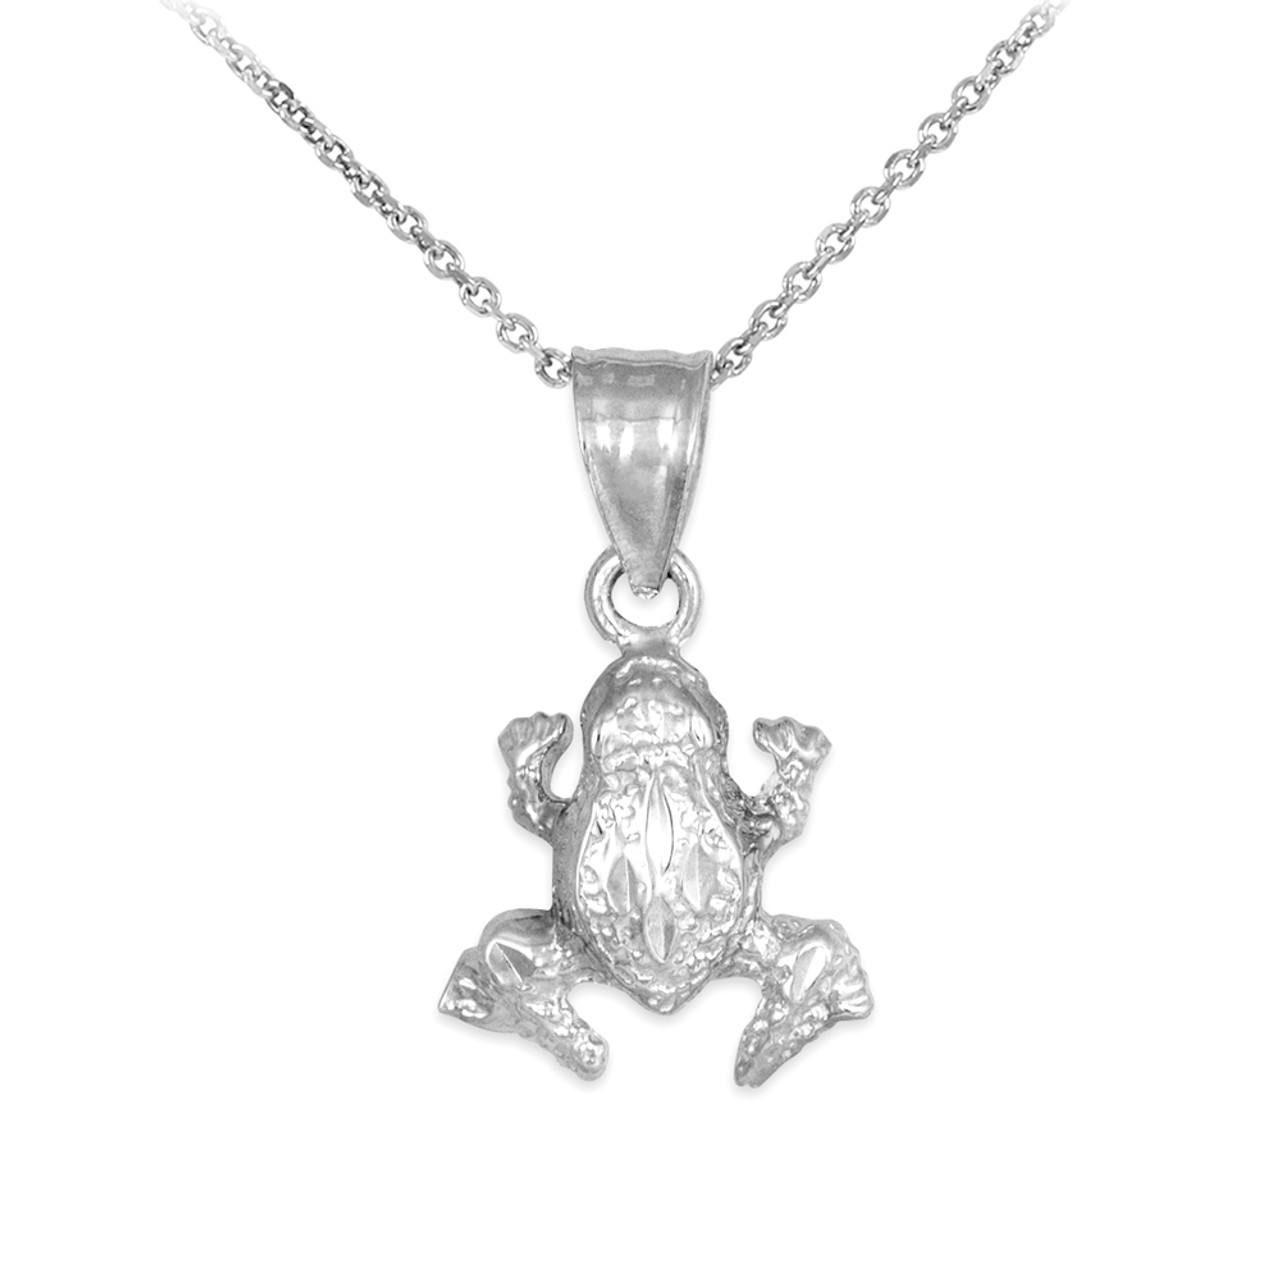 17mm x 15mm Solid 925 Sterling Silver Frog Charm Pendant 